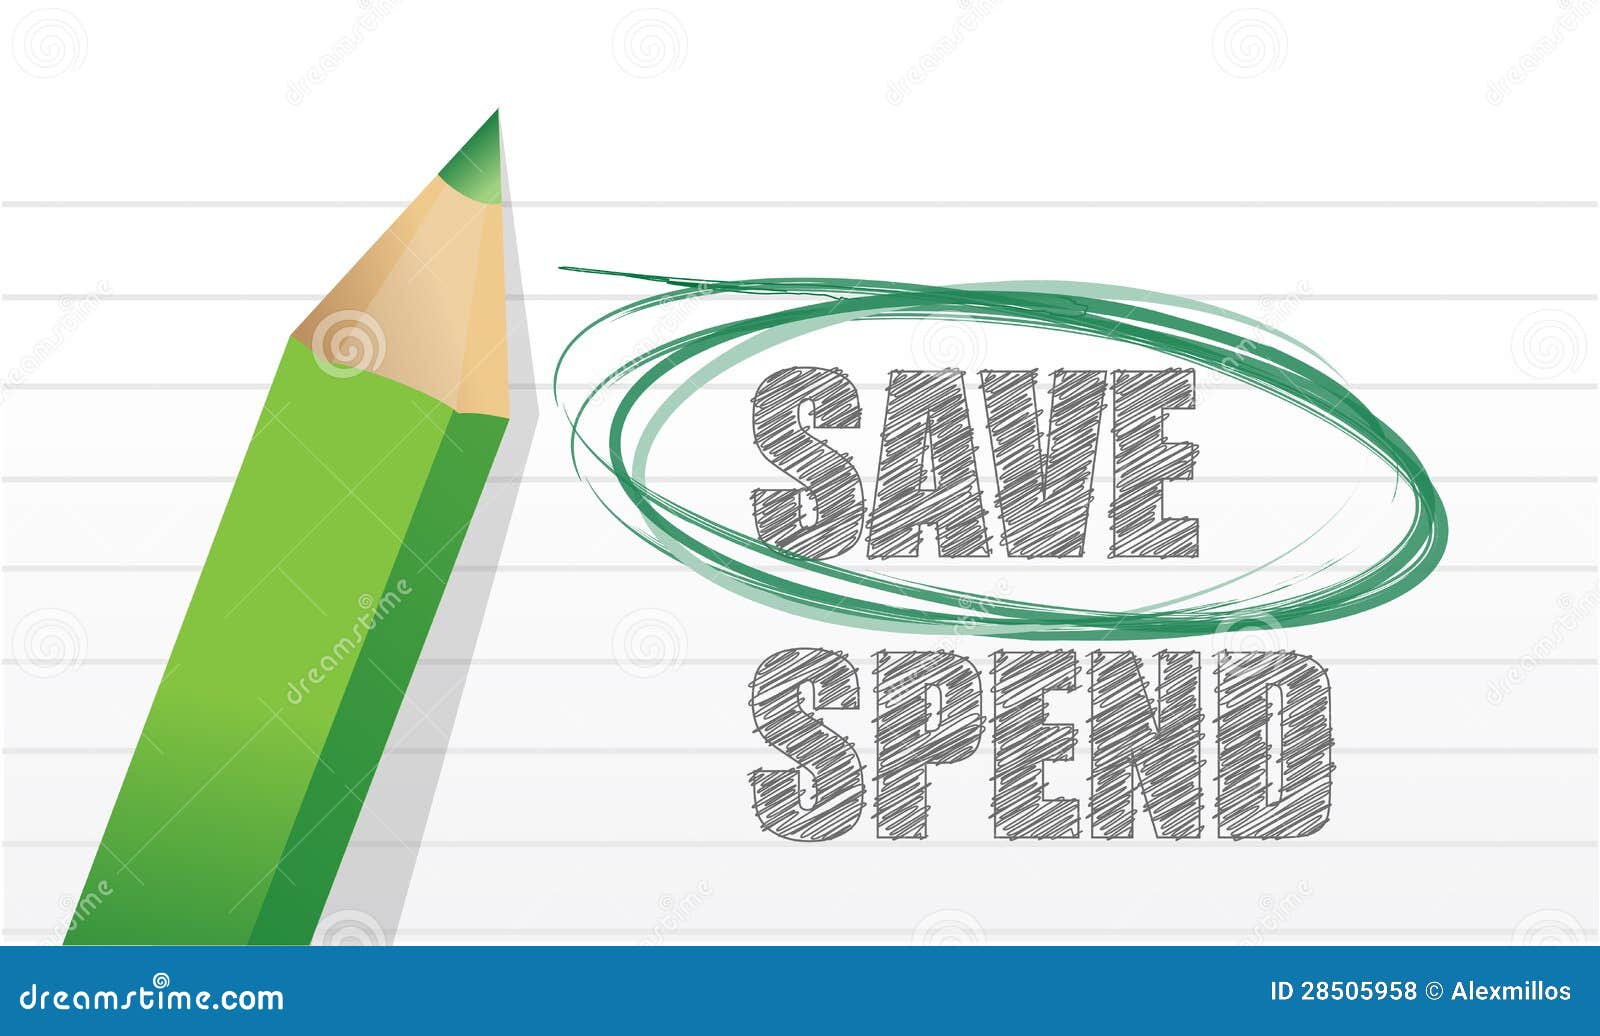 save instead of spend